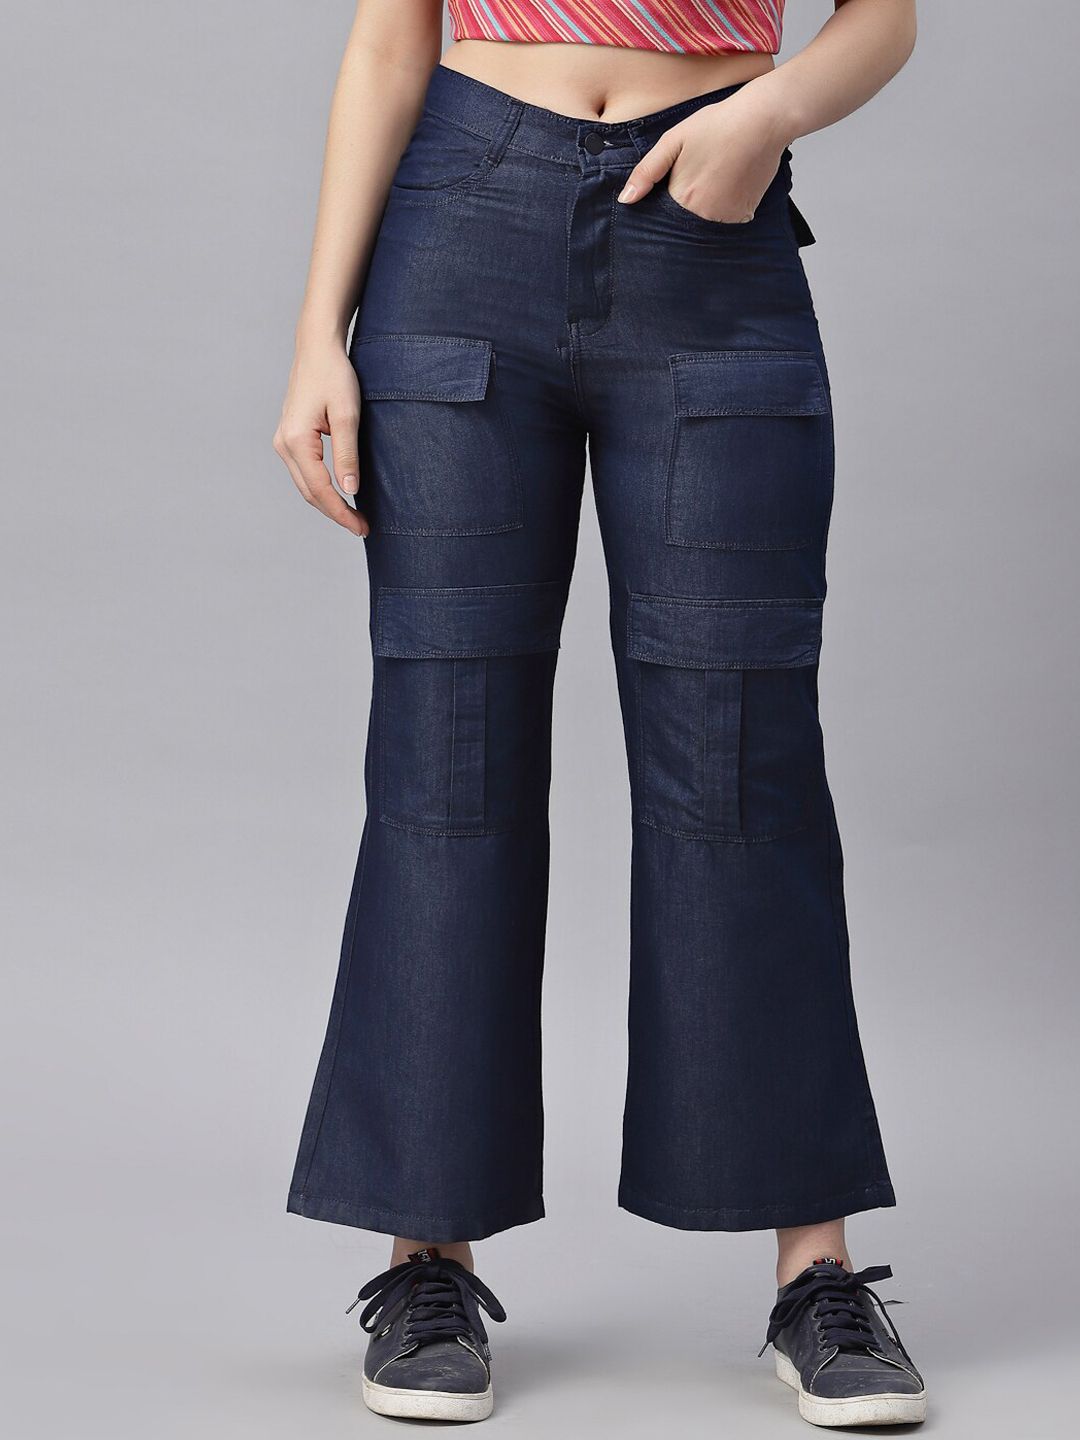 KASSUALLY Women Navy Blue Wide Leg Light Fade Jeans Price in India